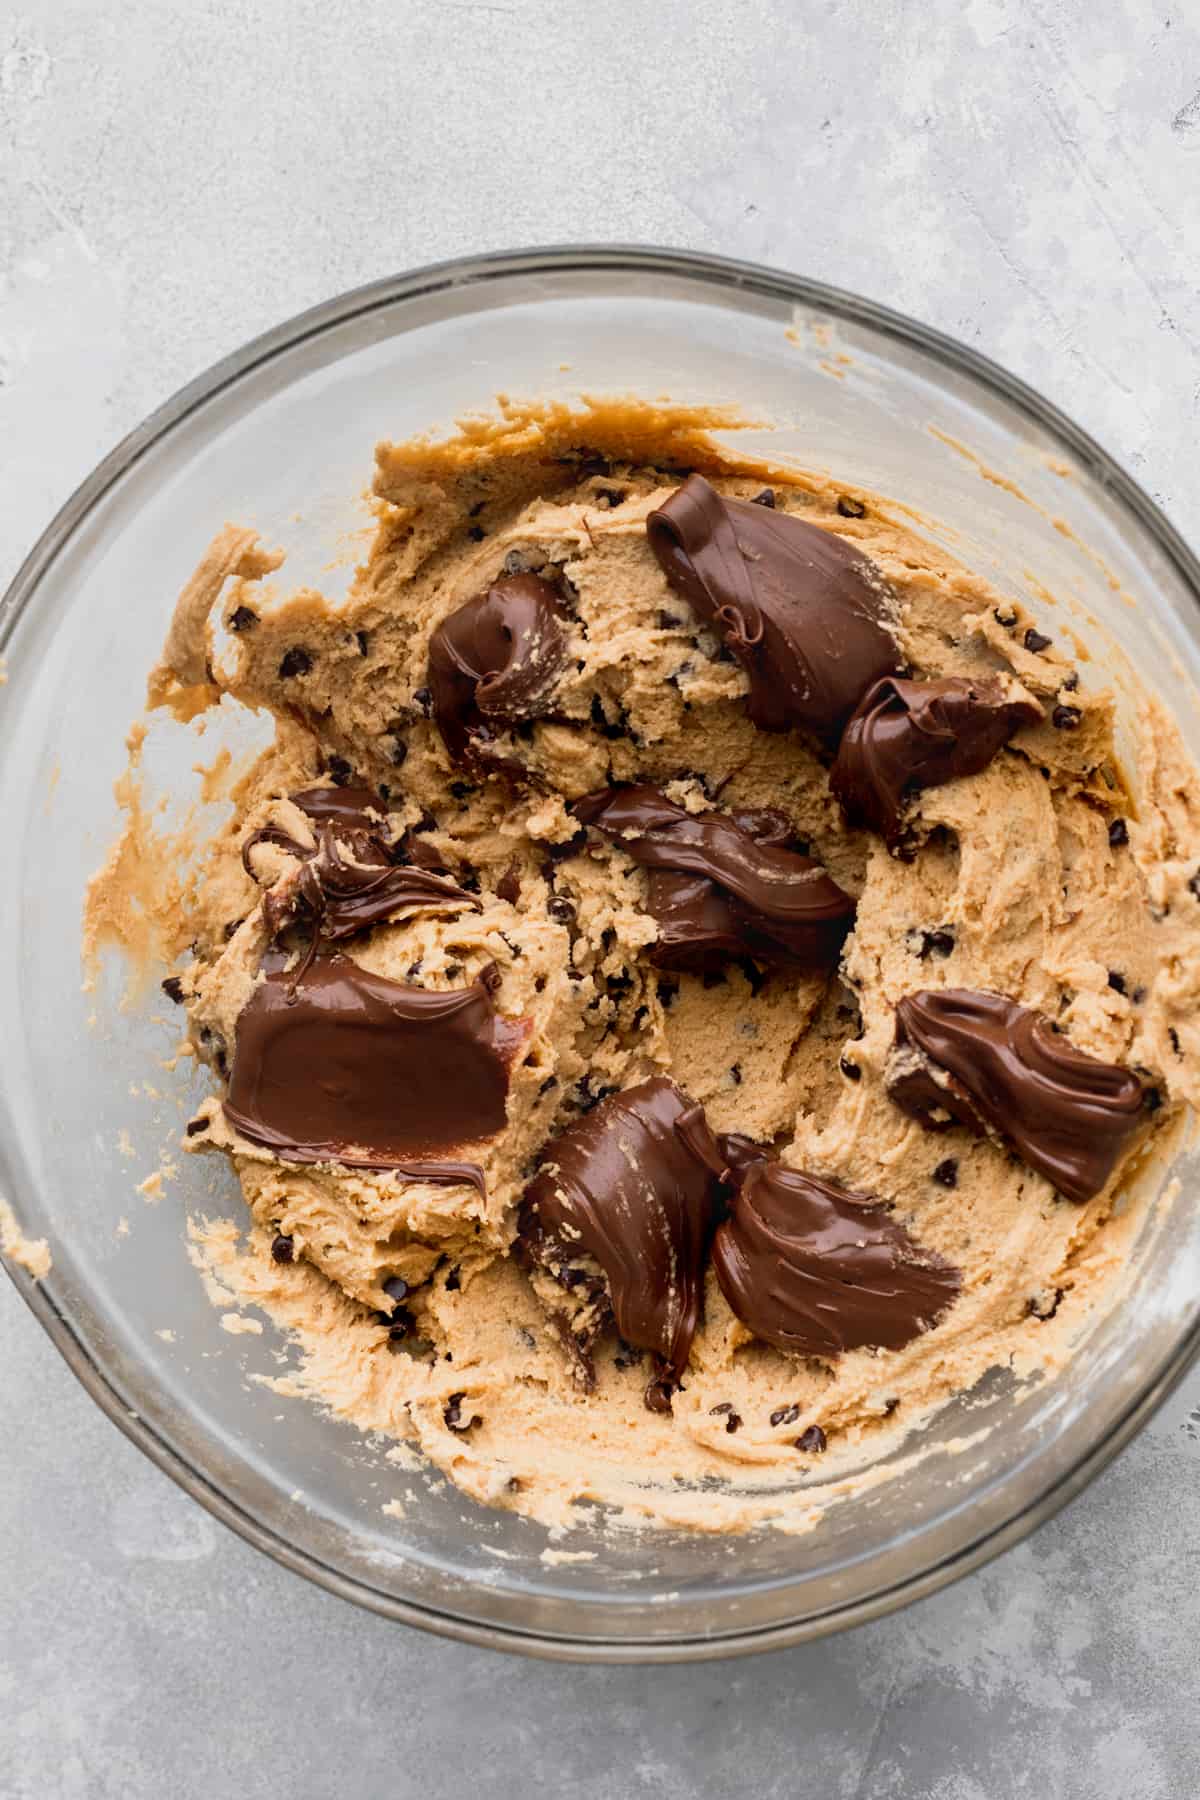 Nutella on top of cookie dough.